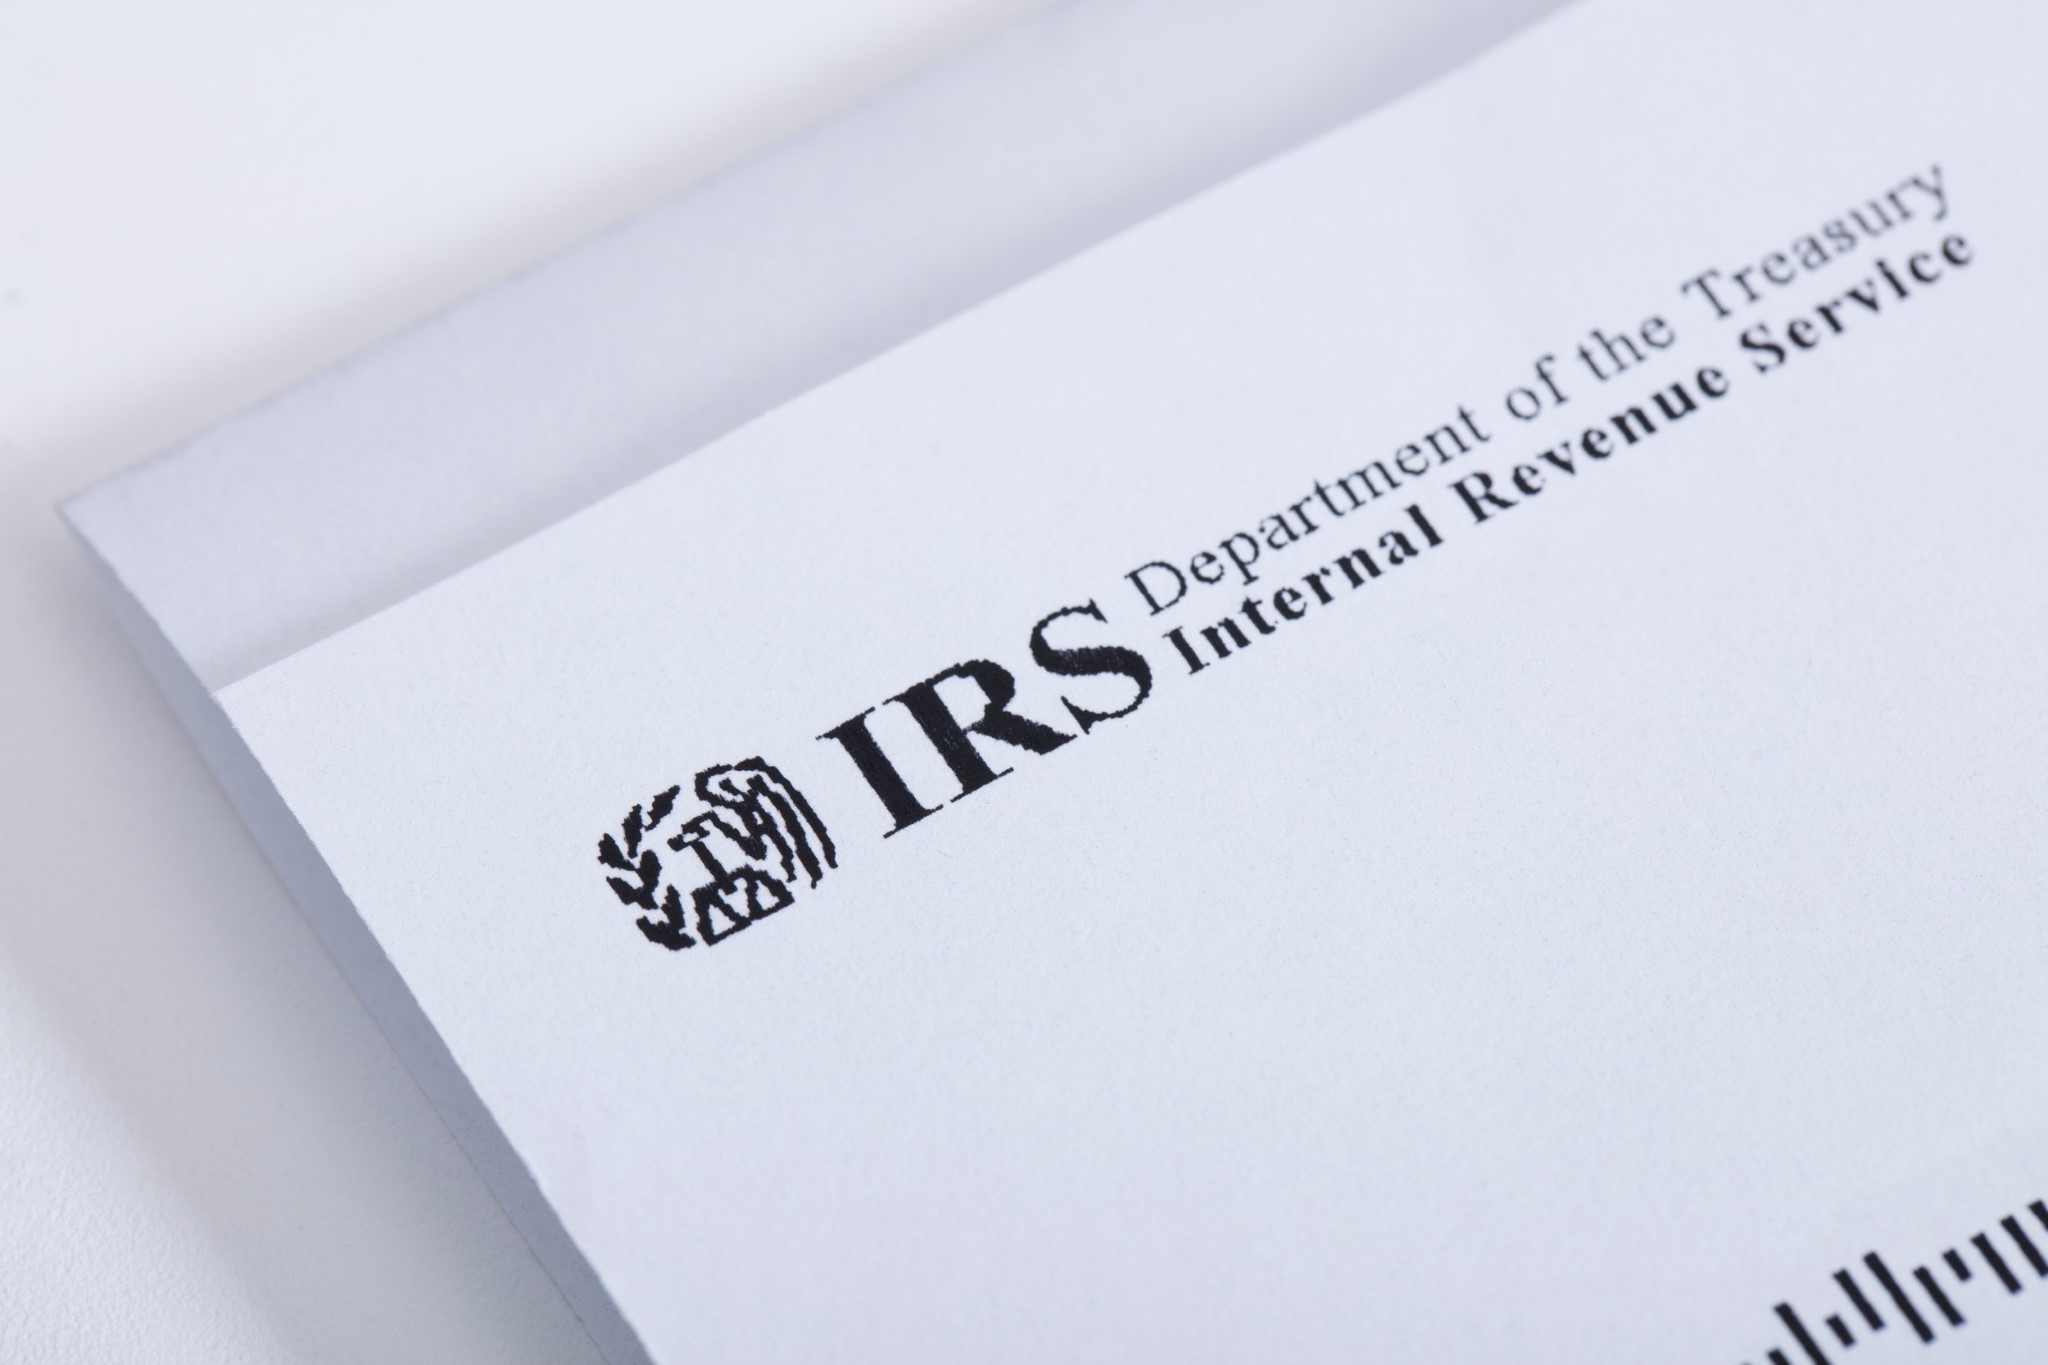 Contacting the IRS 1